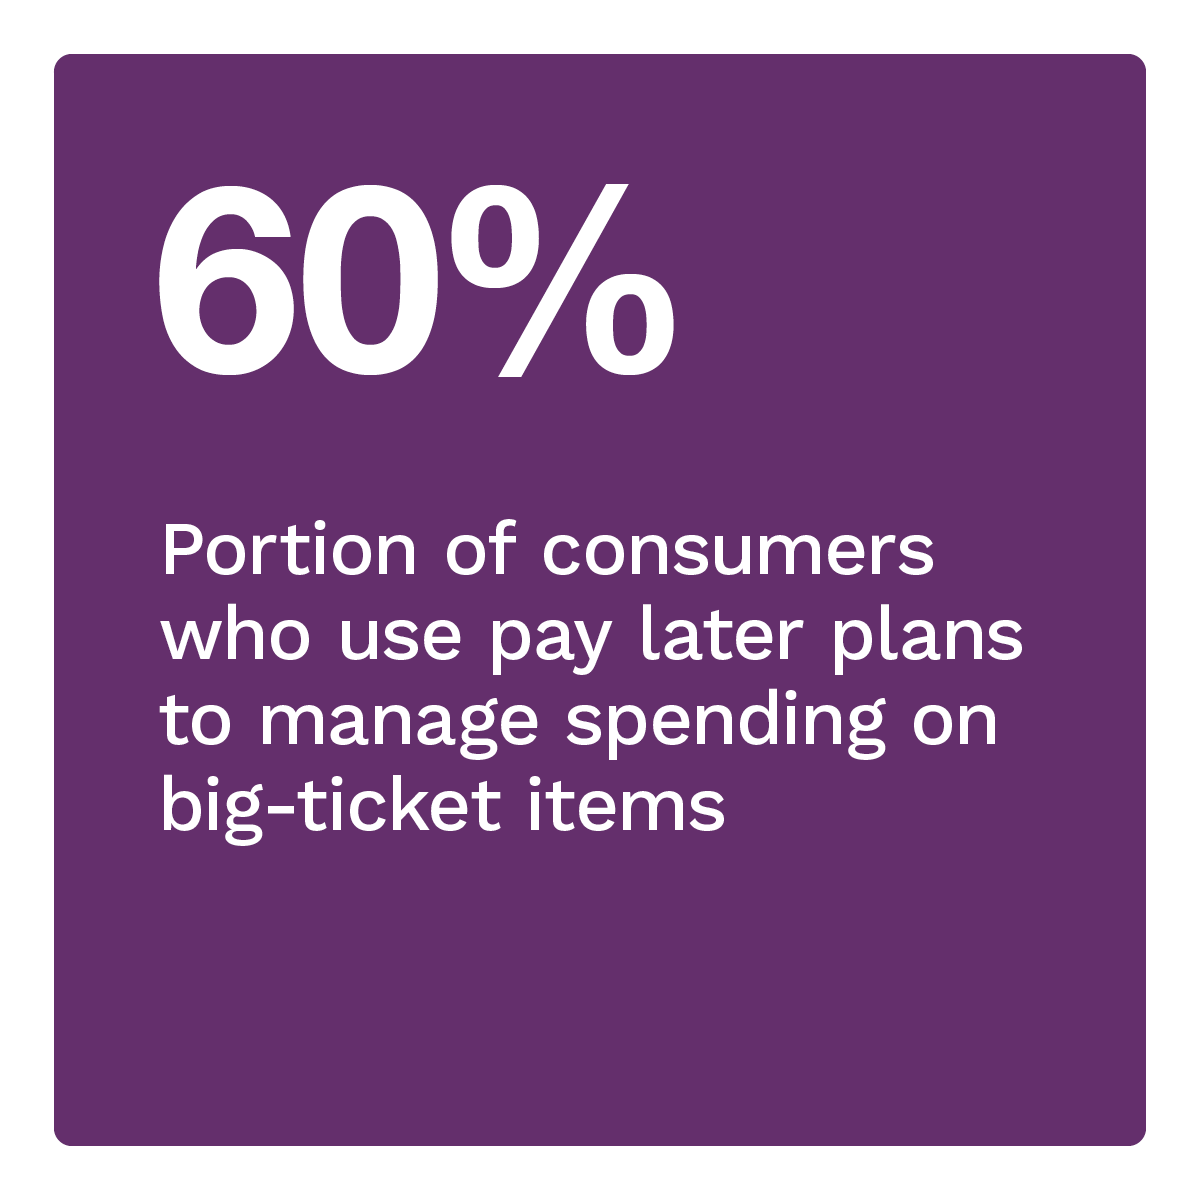 60%: Portion of consumers who use pay later plans to manage spending on big-ticket items